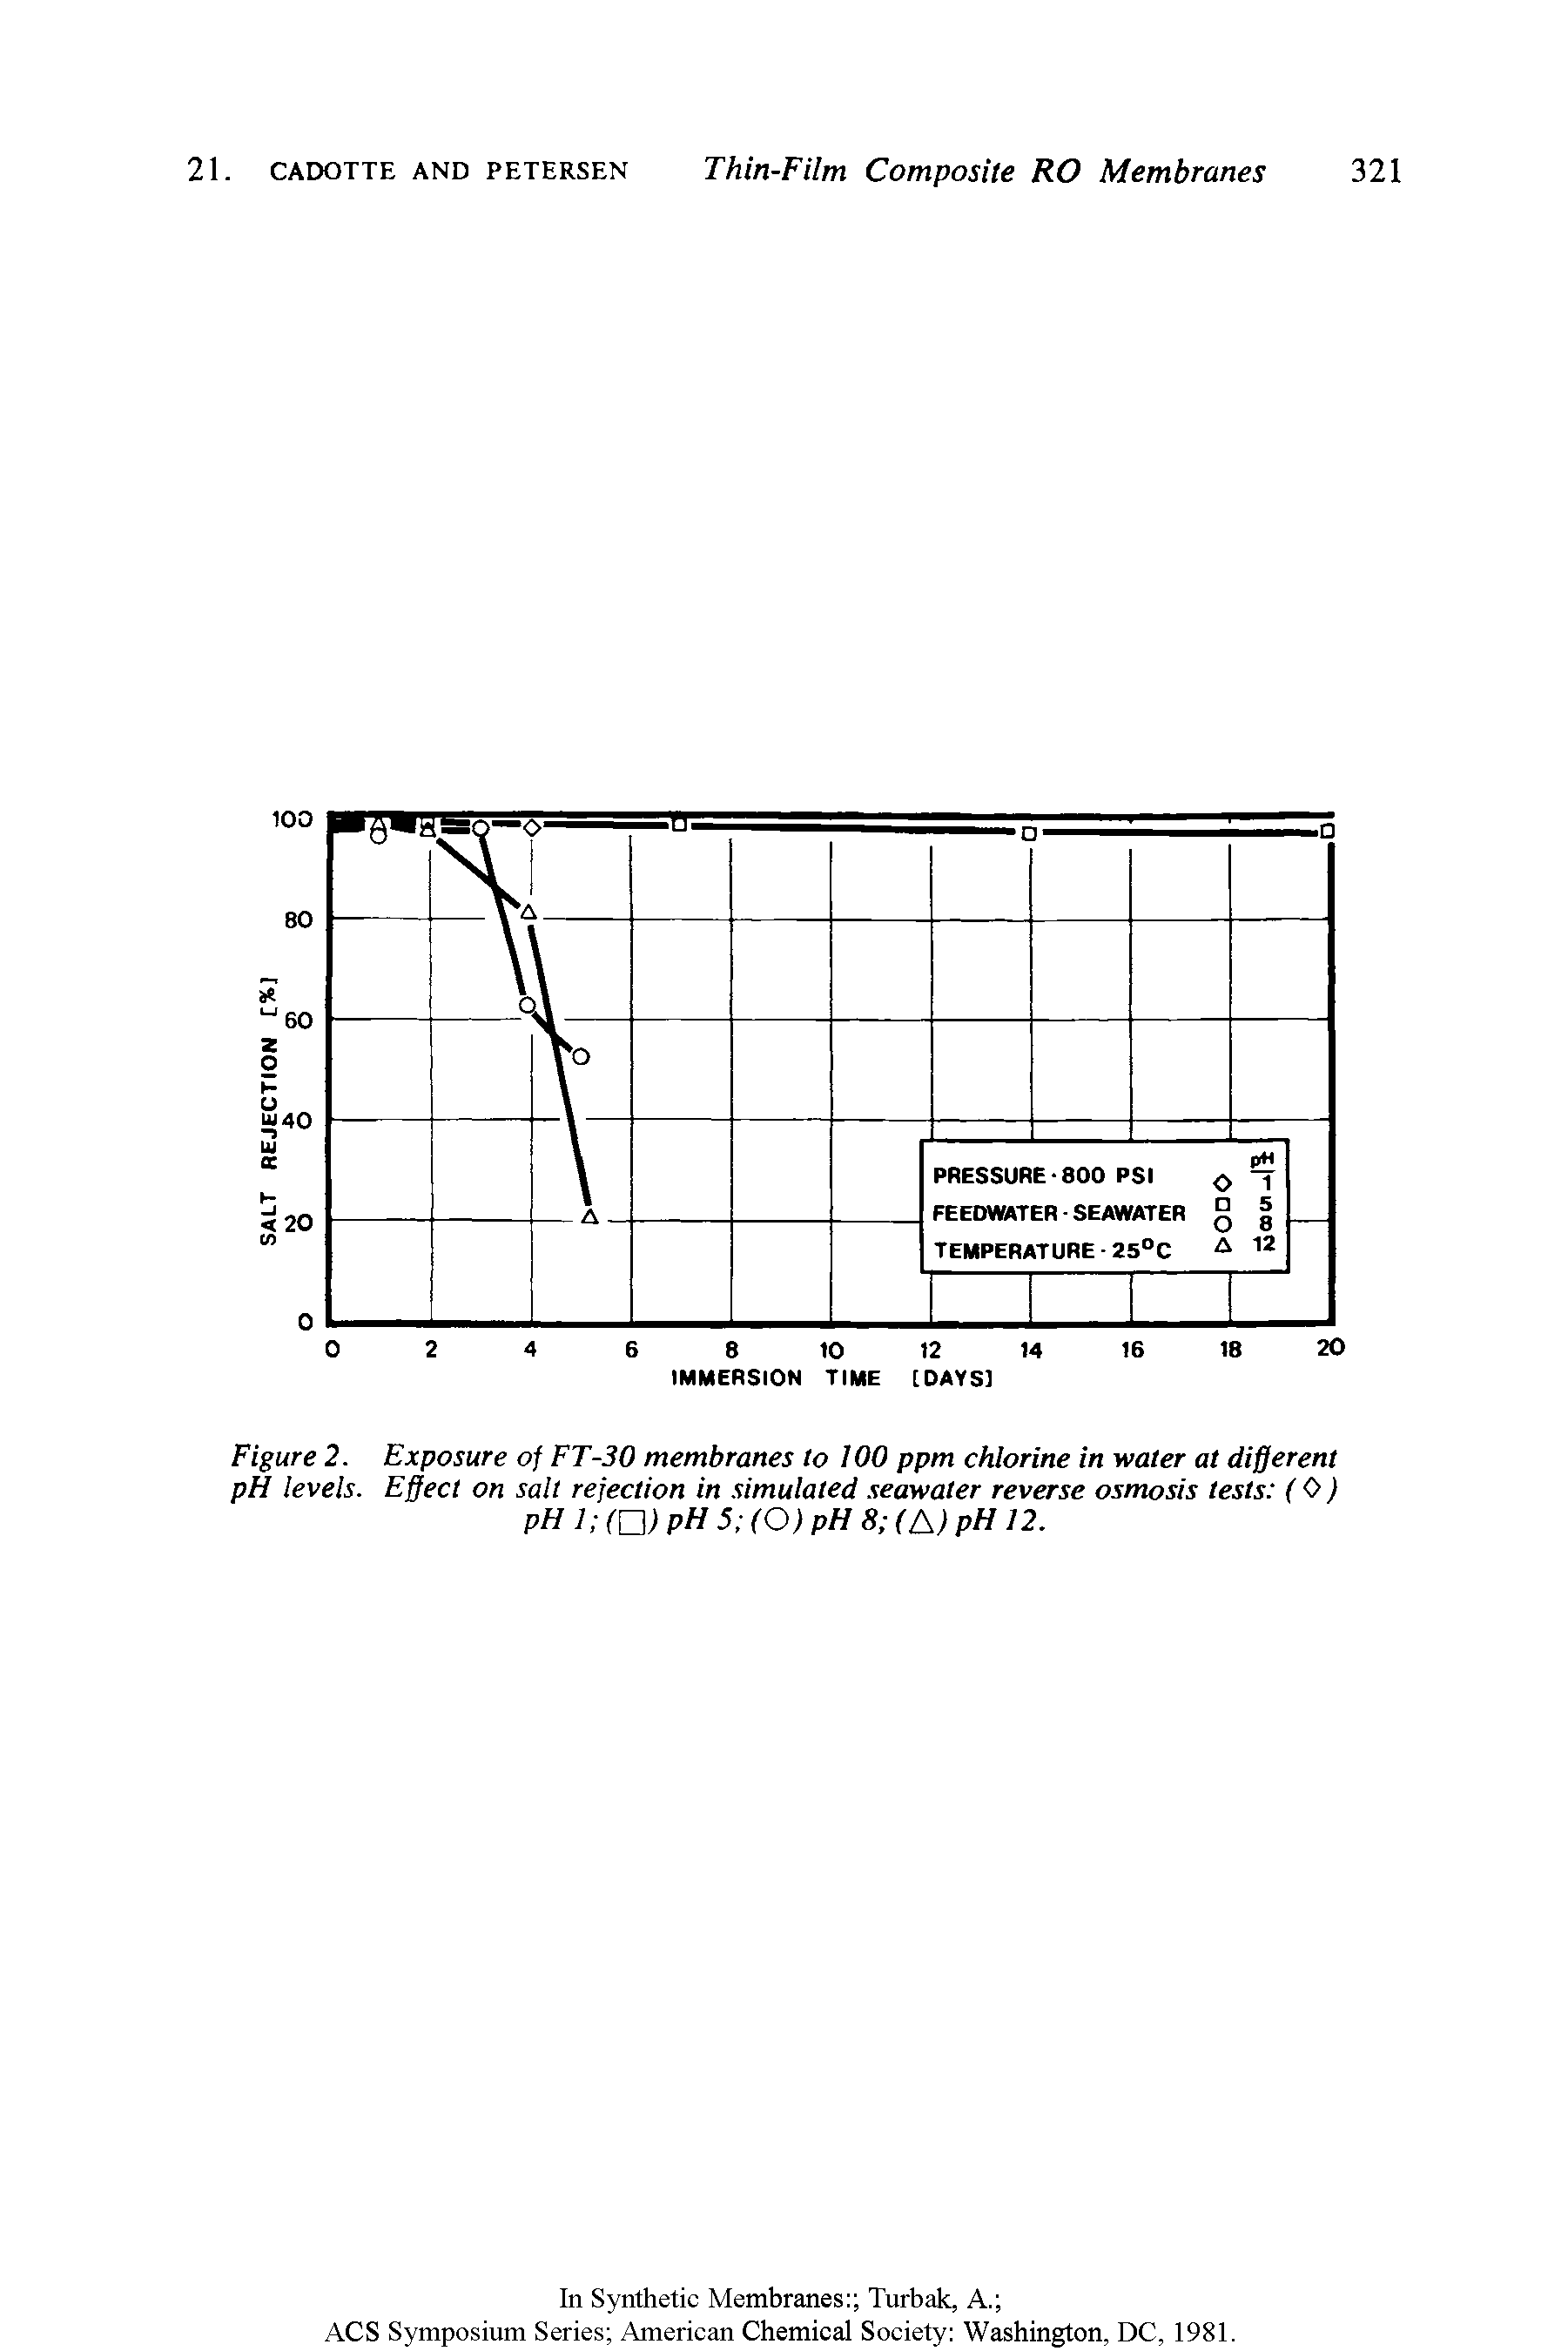 Figure 2. Exposure of FT-30 membranes to 100 ppm chlorine in water at different pH levels. Effect on salt refection in simulated. seawater reverse osmosis tests (0) pH 1 Cn pH 5 (O) pH 8 (A) pH 12.